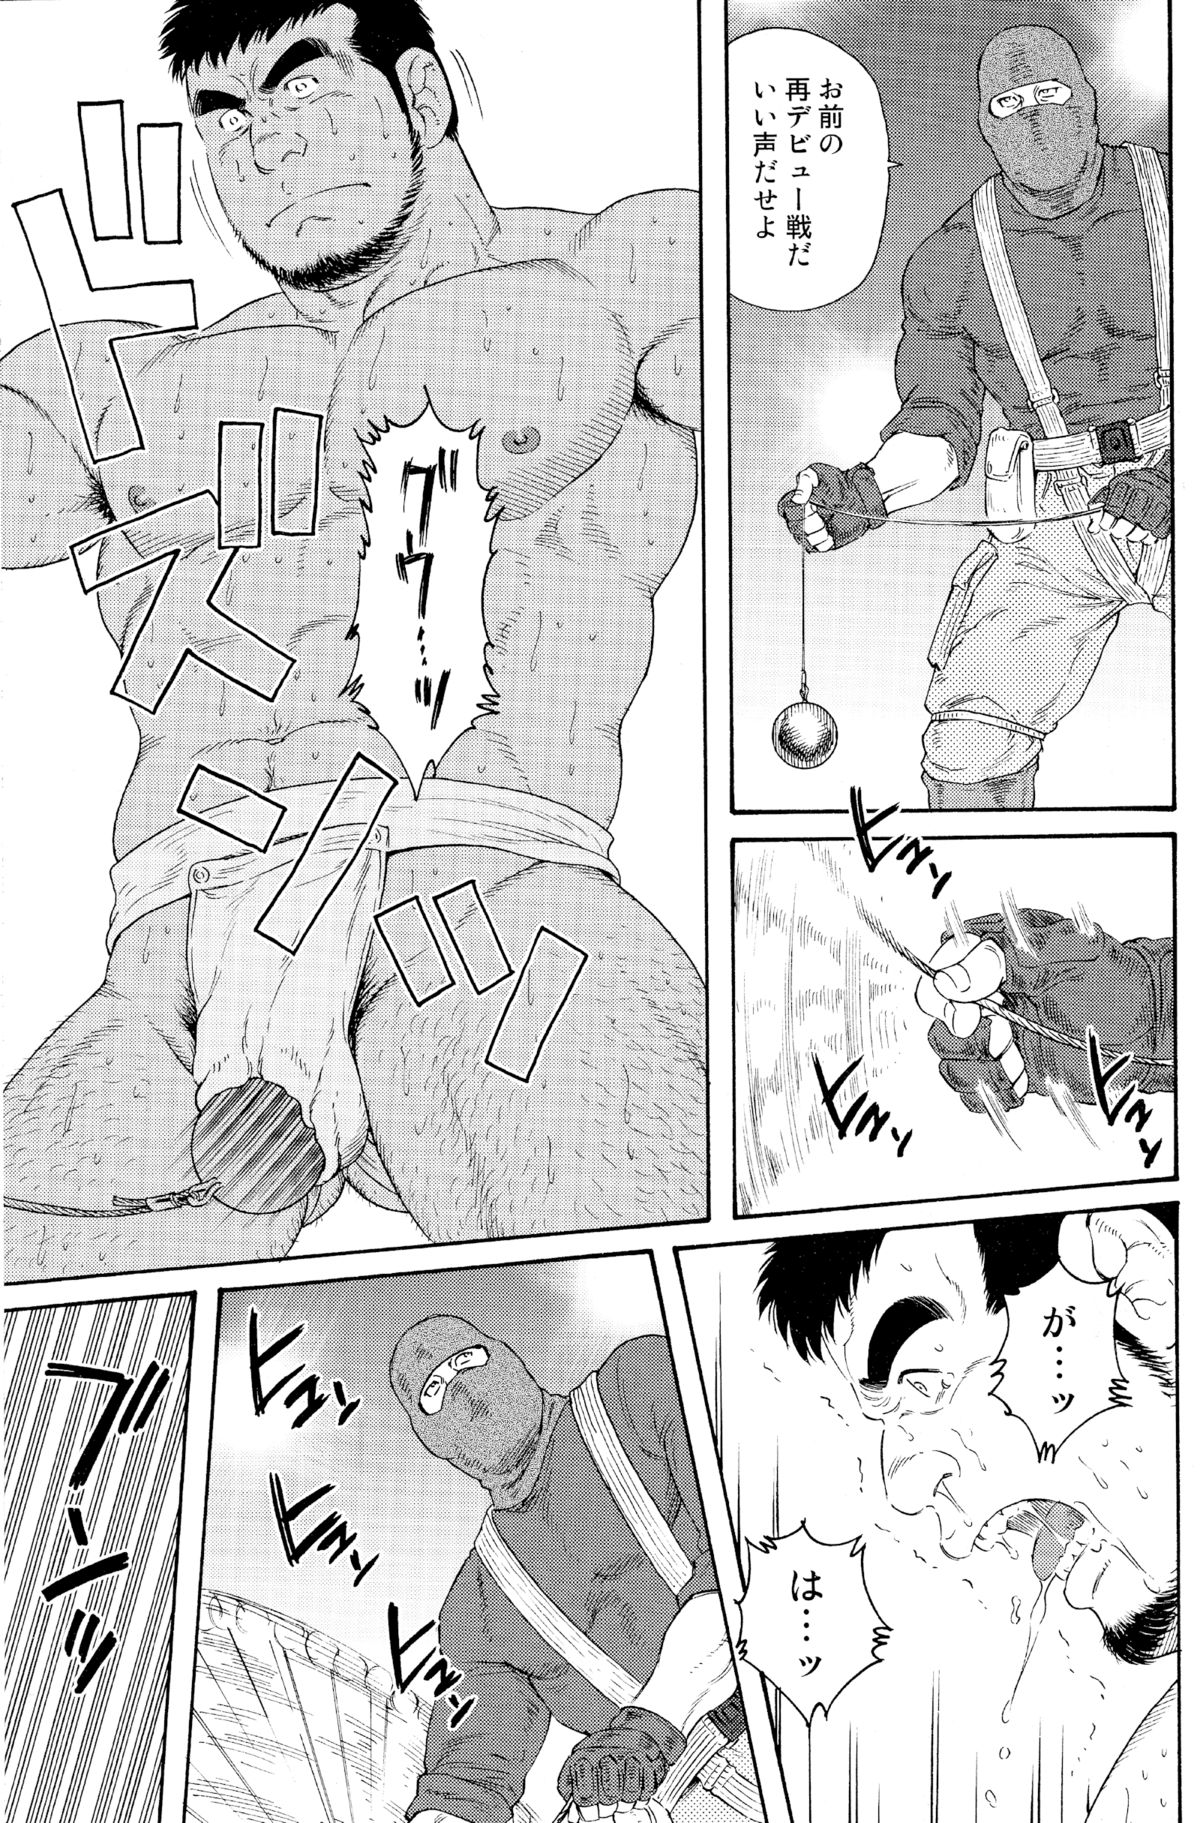 [Gengoroh Tagame] Standing Ovation page 5 full